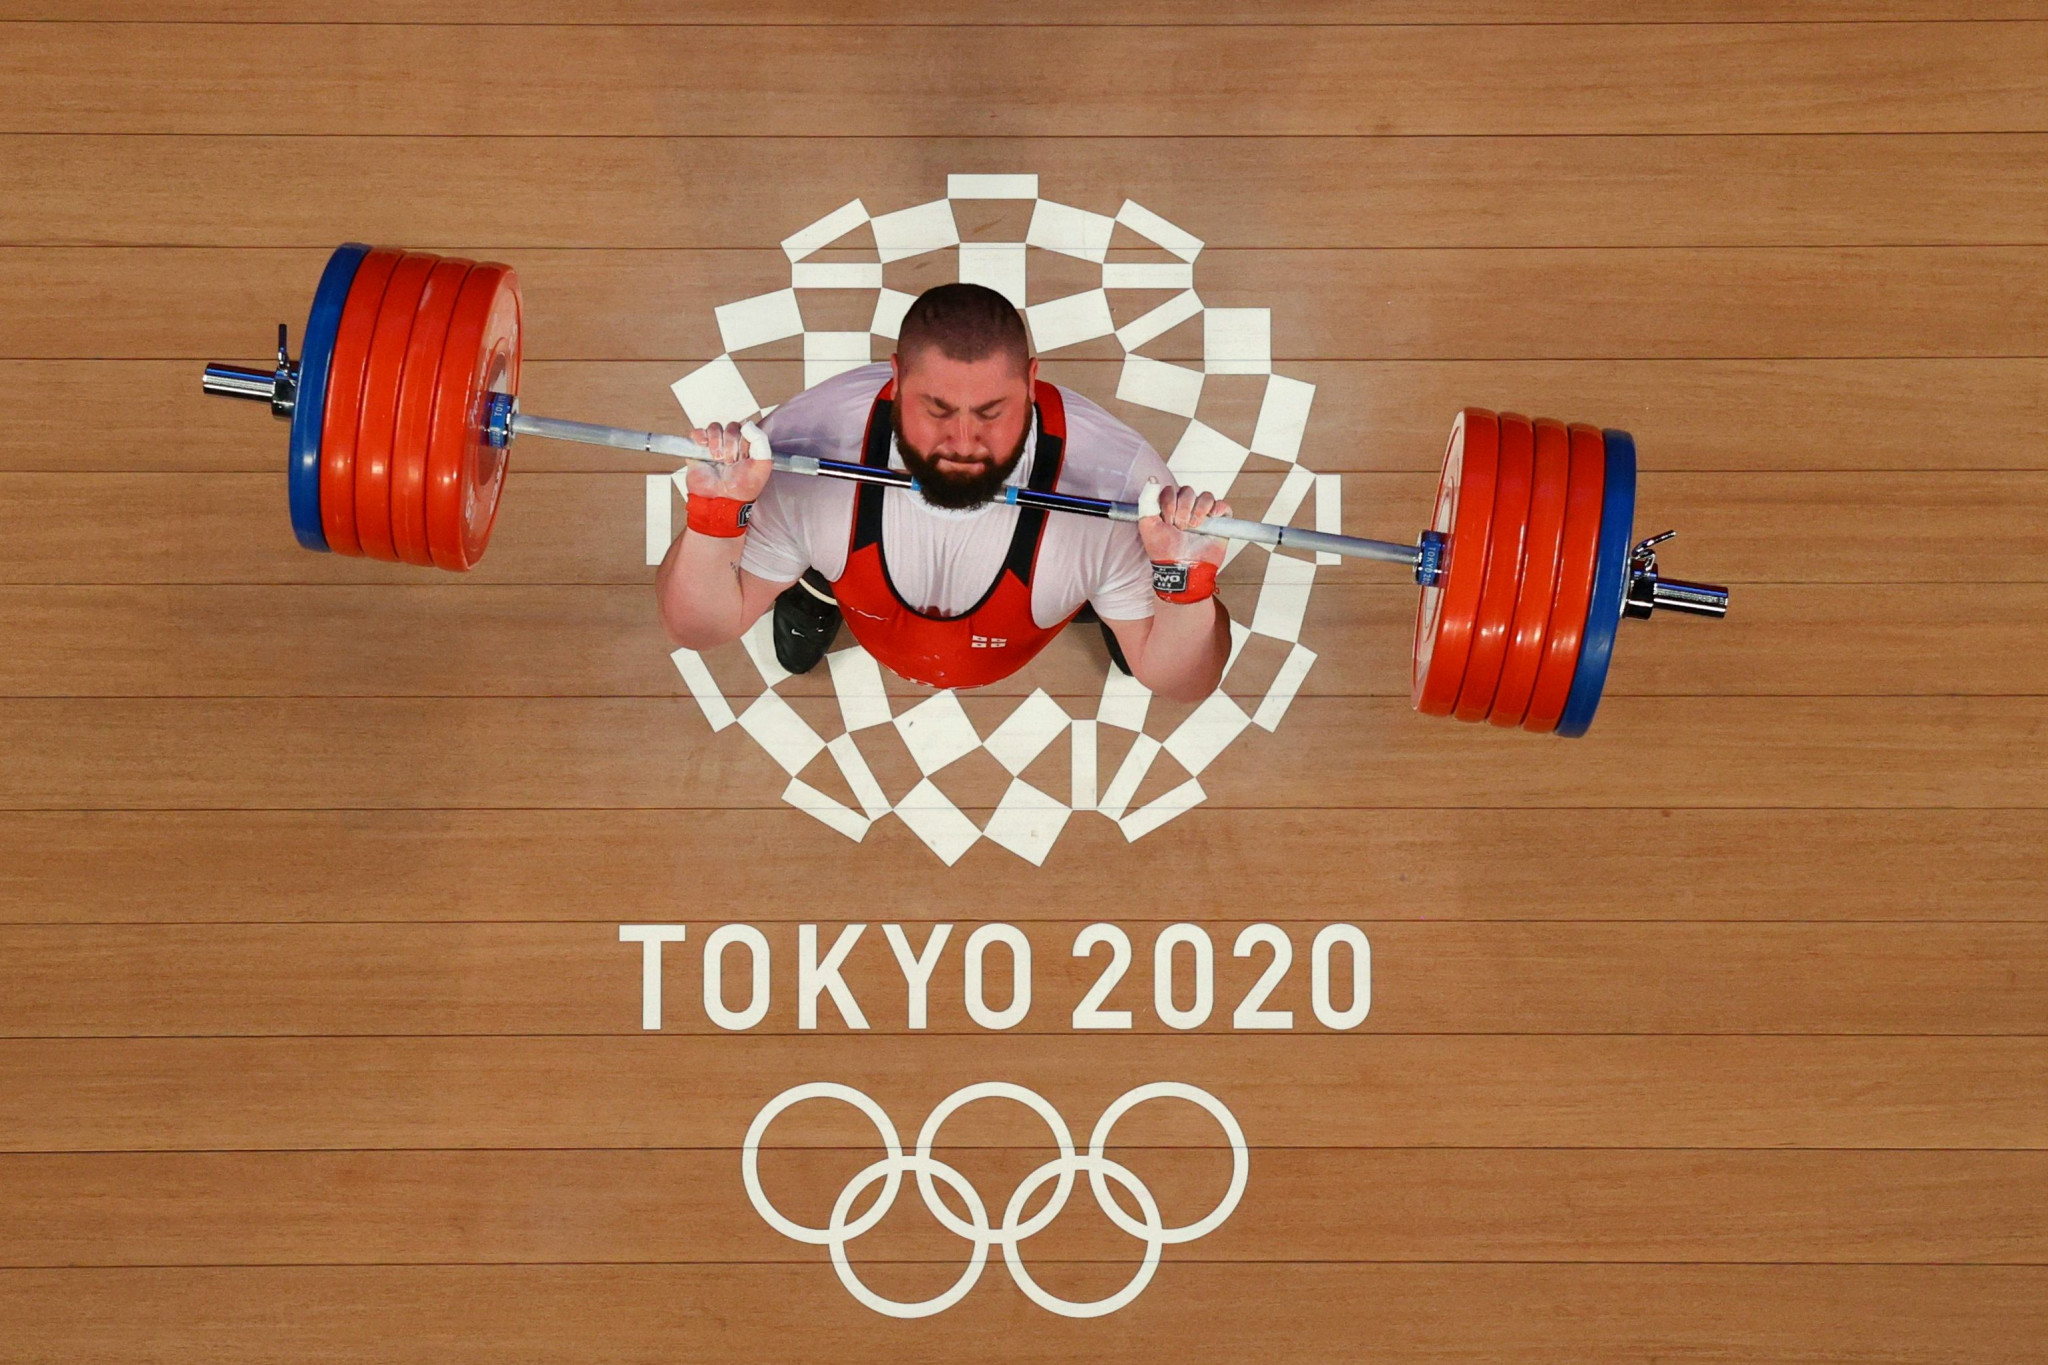 Lasha Talakhadze ended the Tokyo 2020 weightlifting programme in stunning fashion, breaking all three of his own super-heavyweight world records en route to a gold medal ©Getty Images